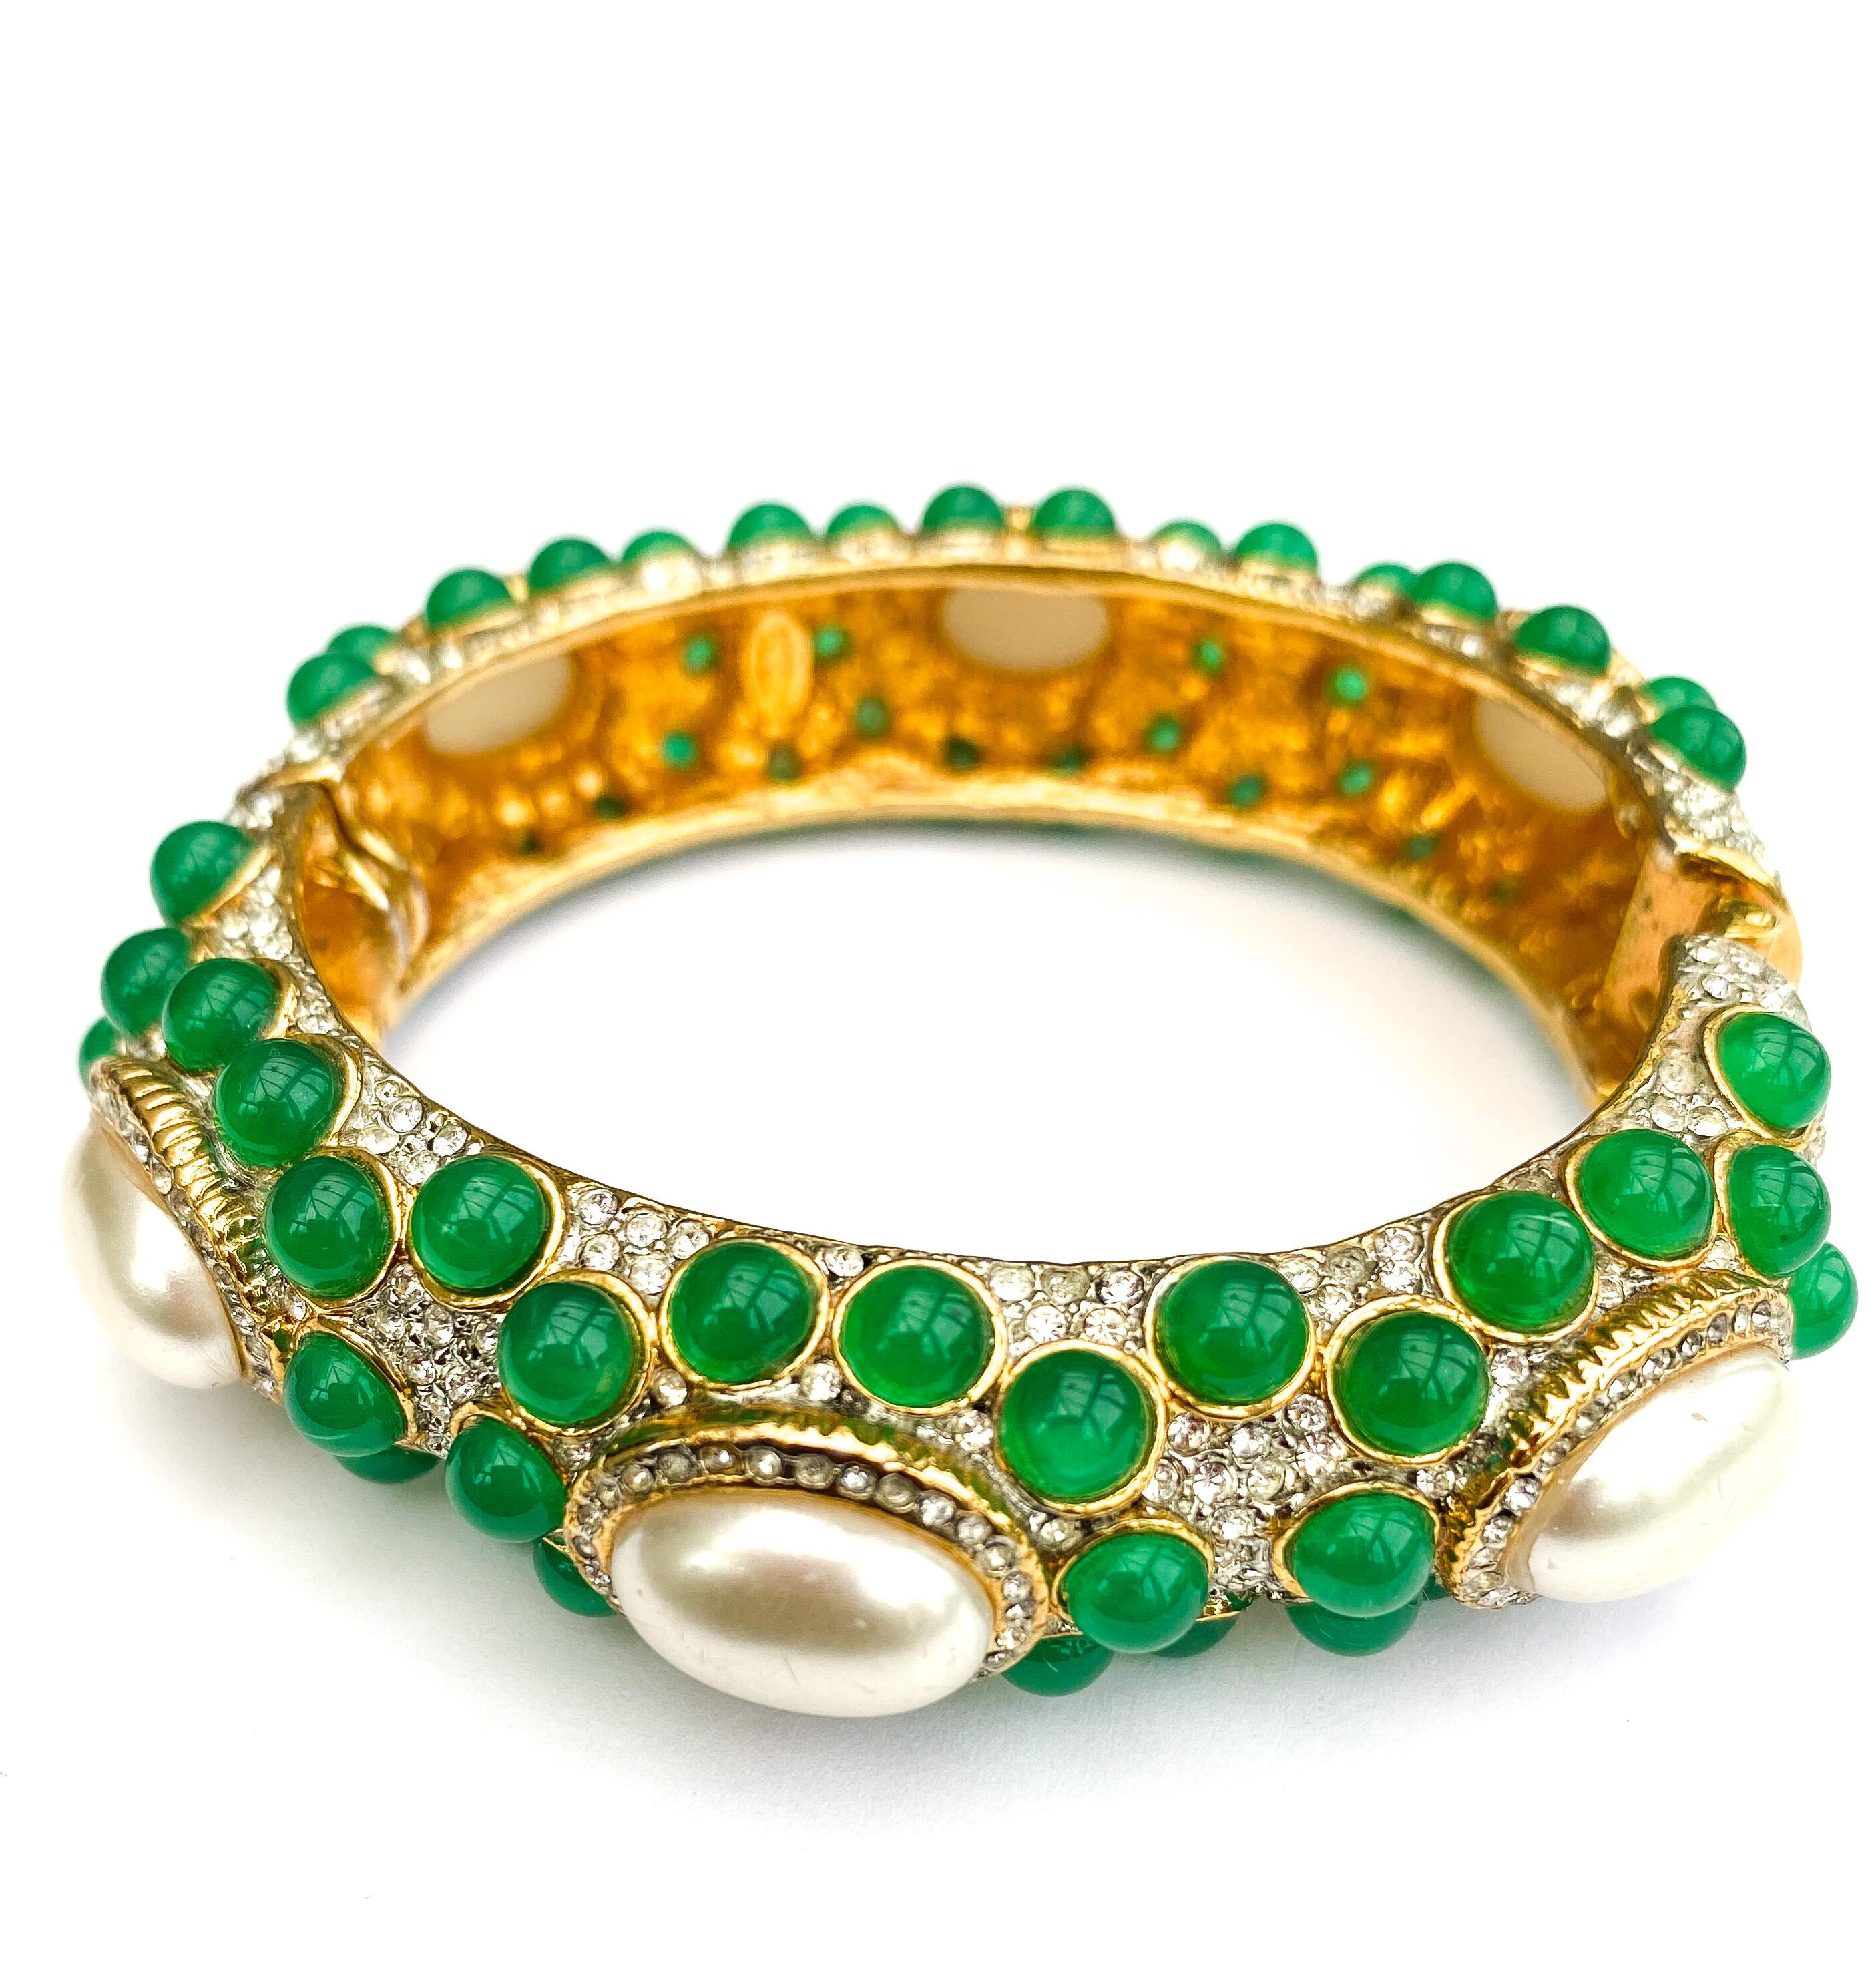 A beautiful jewelled bangle, in emerald glass cabuchons, clear paste and paste pearl cabuchons, 
in the style of Moghul jewellery, sparkling and eye catching. With a firm 'snap clasp' an easy to wear jewel, reminiscent of the 'Swans' and New York